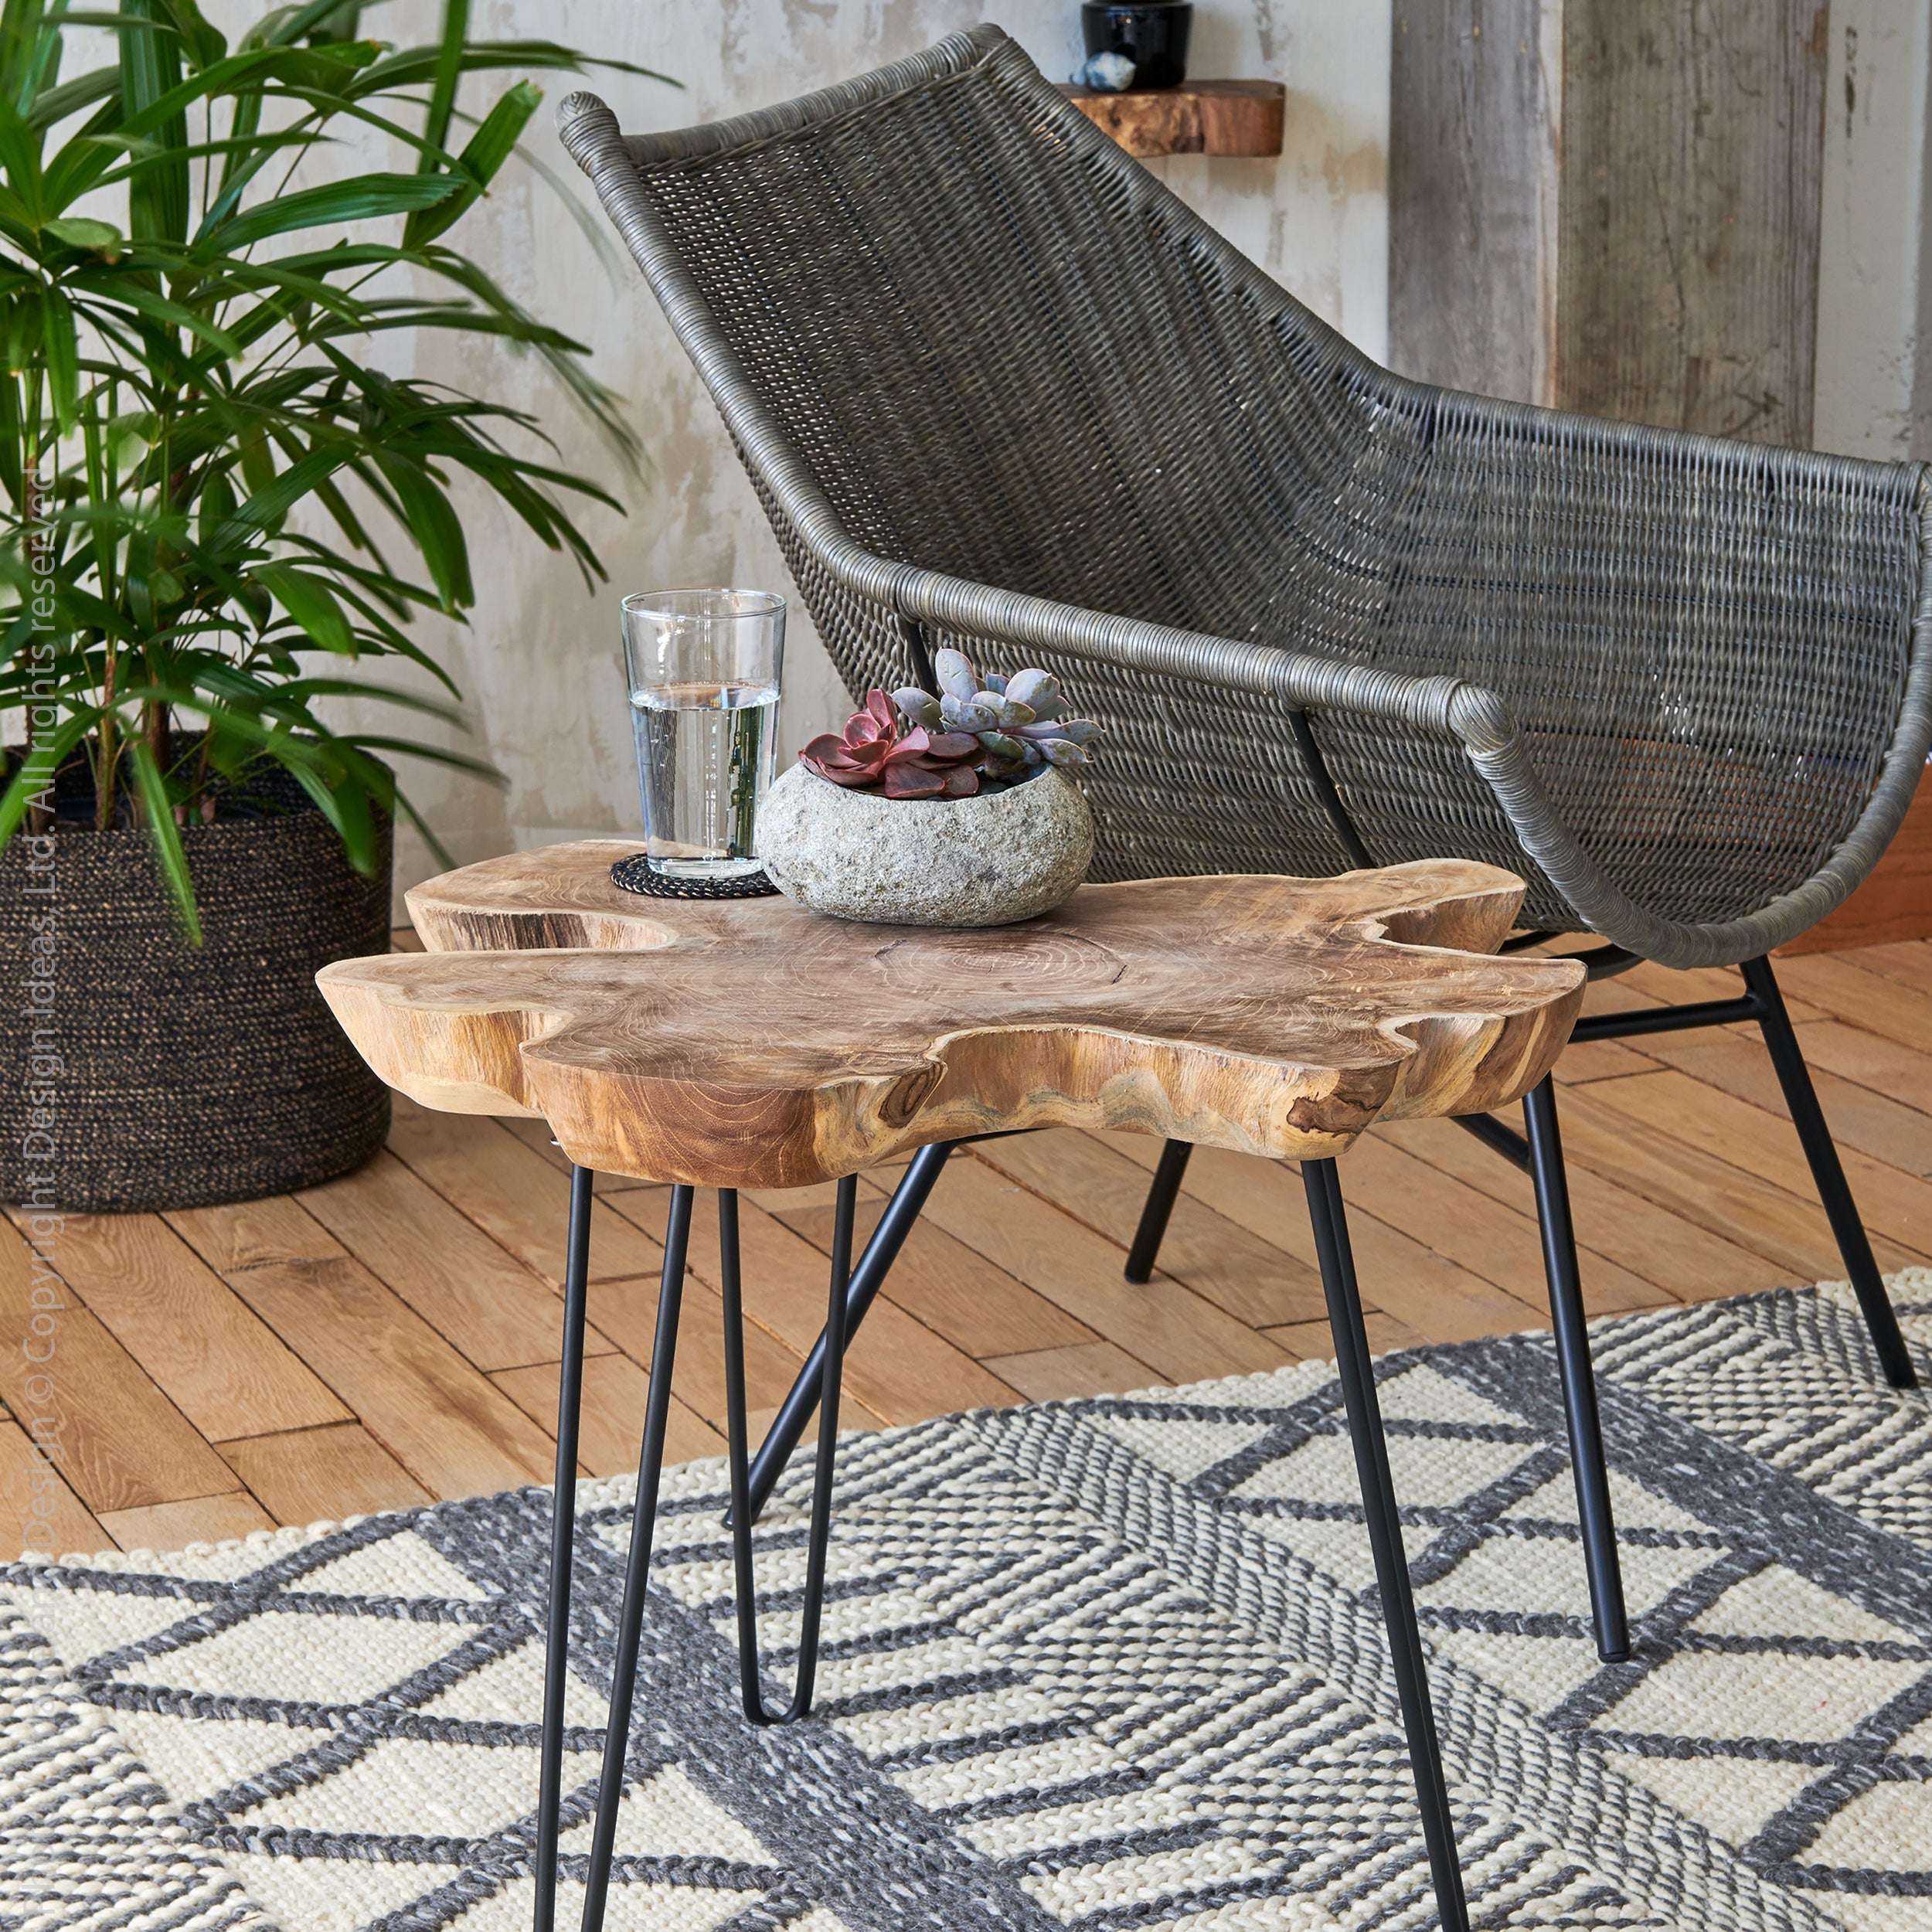 Takara Teak Side Table Black Color | Image 2 | From the Takara Collection | Elegantly constructed with natural teak for long lasting use | This table is sustainably sourced | Available in natural color | texxture home